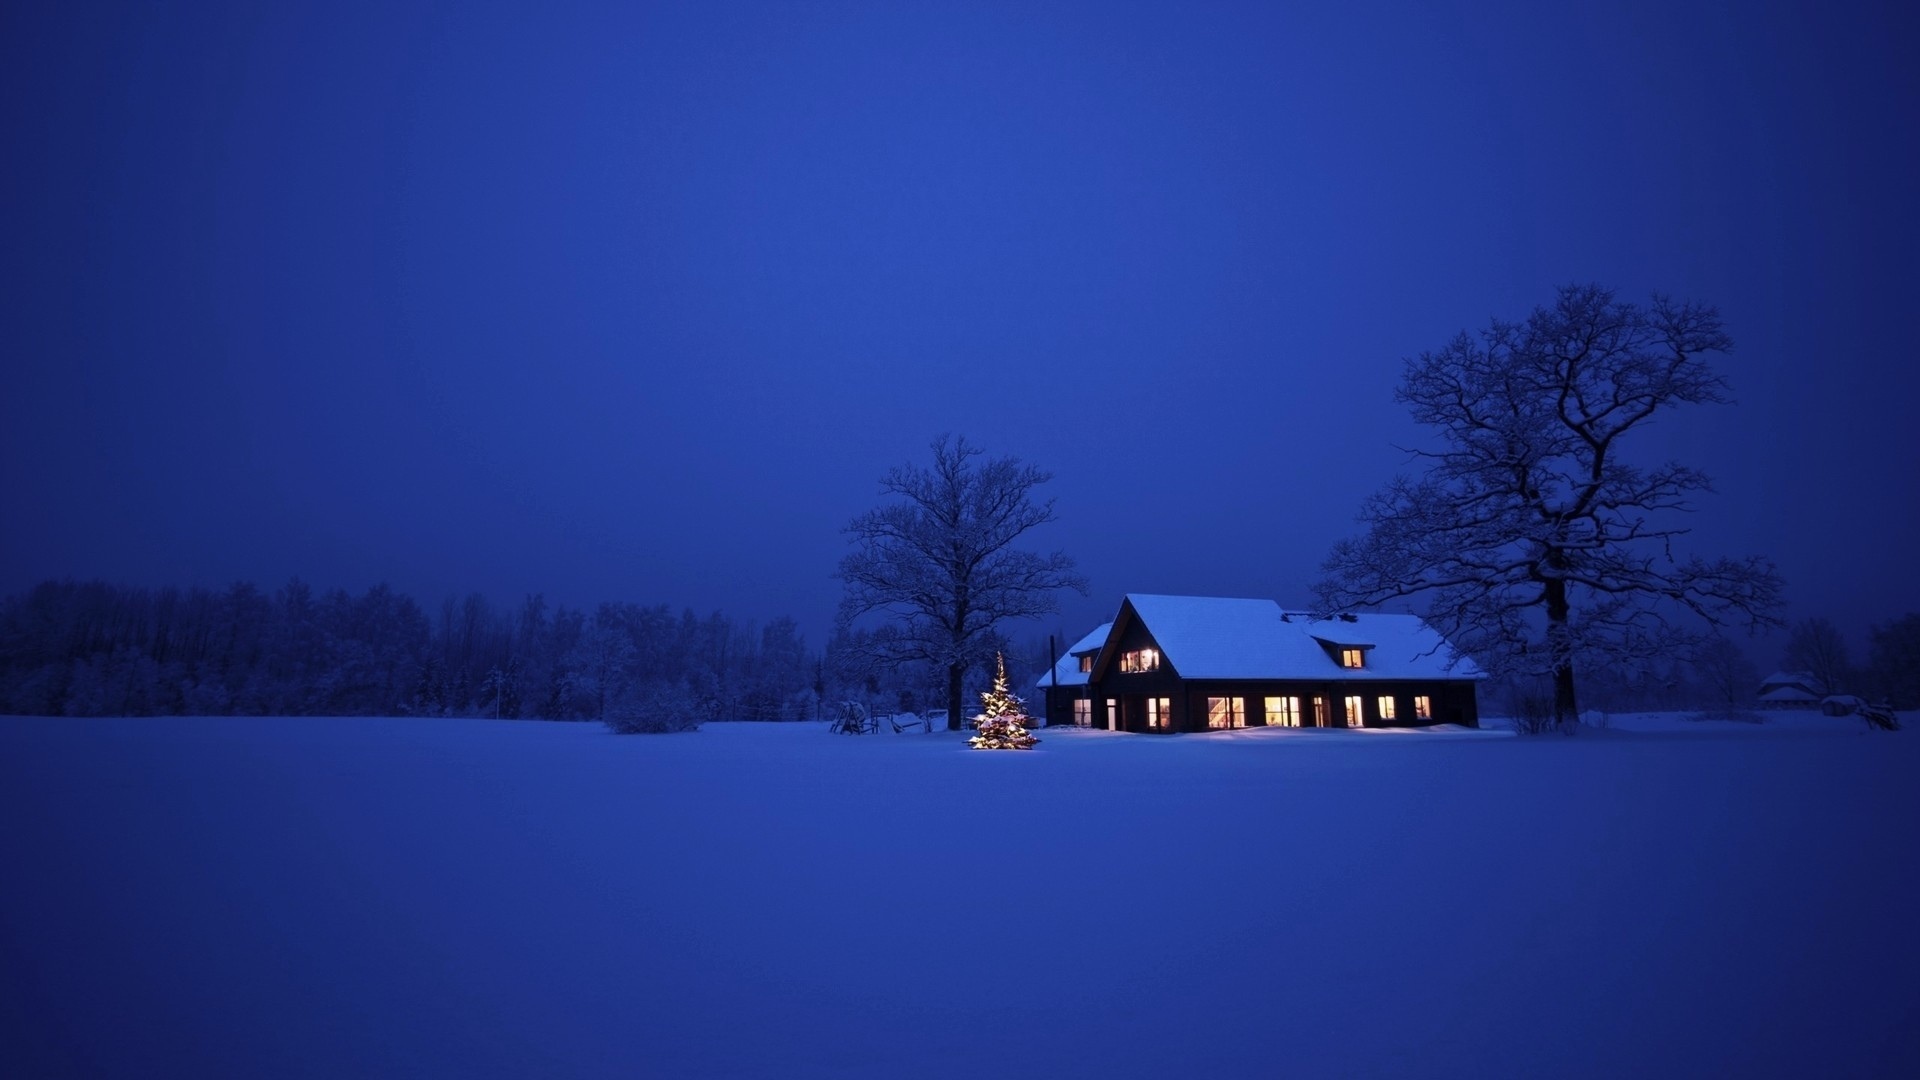 snow, houses, christmas xmas, new year, landscape, holidays, winter, blue QHD